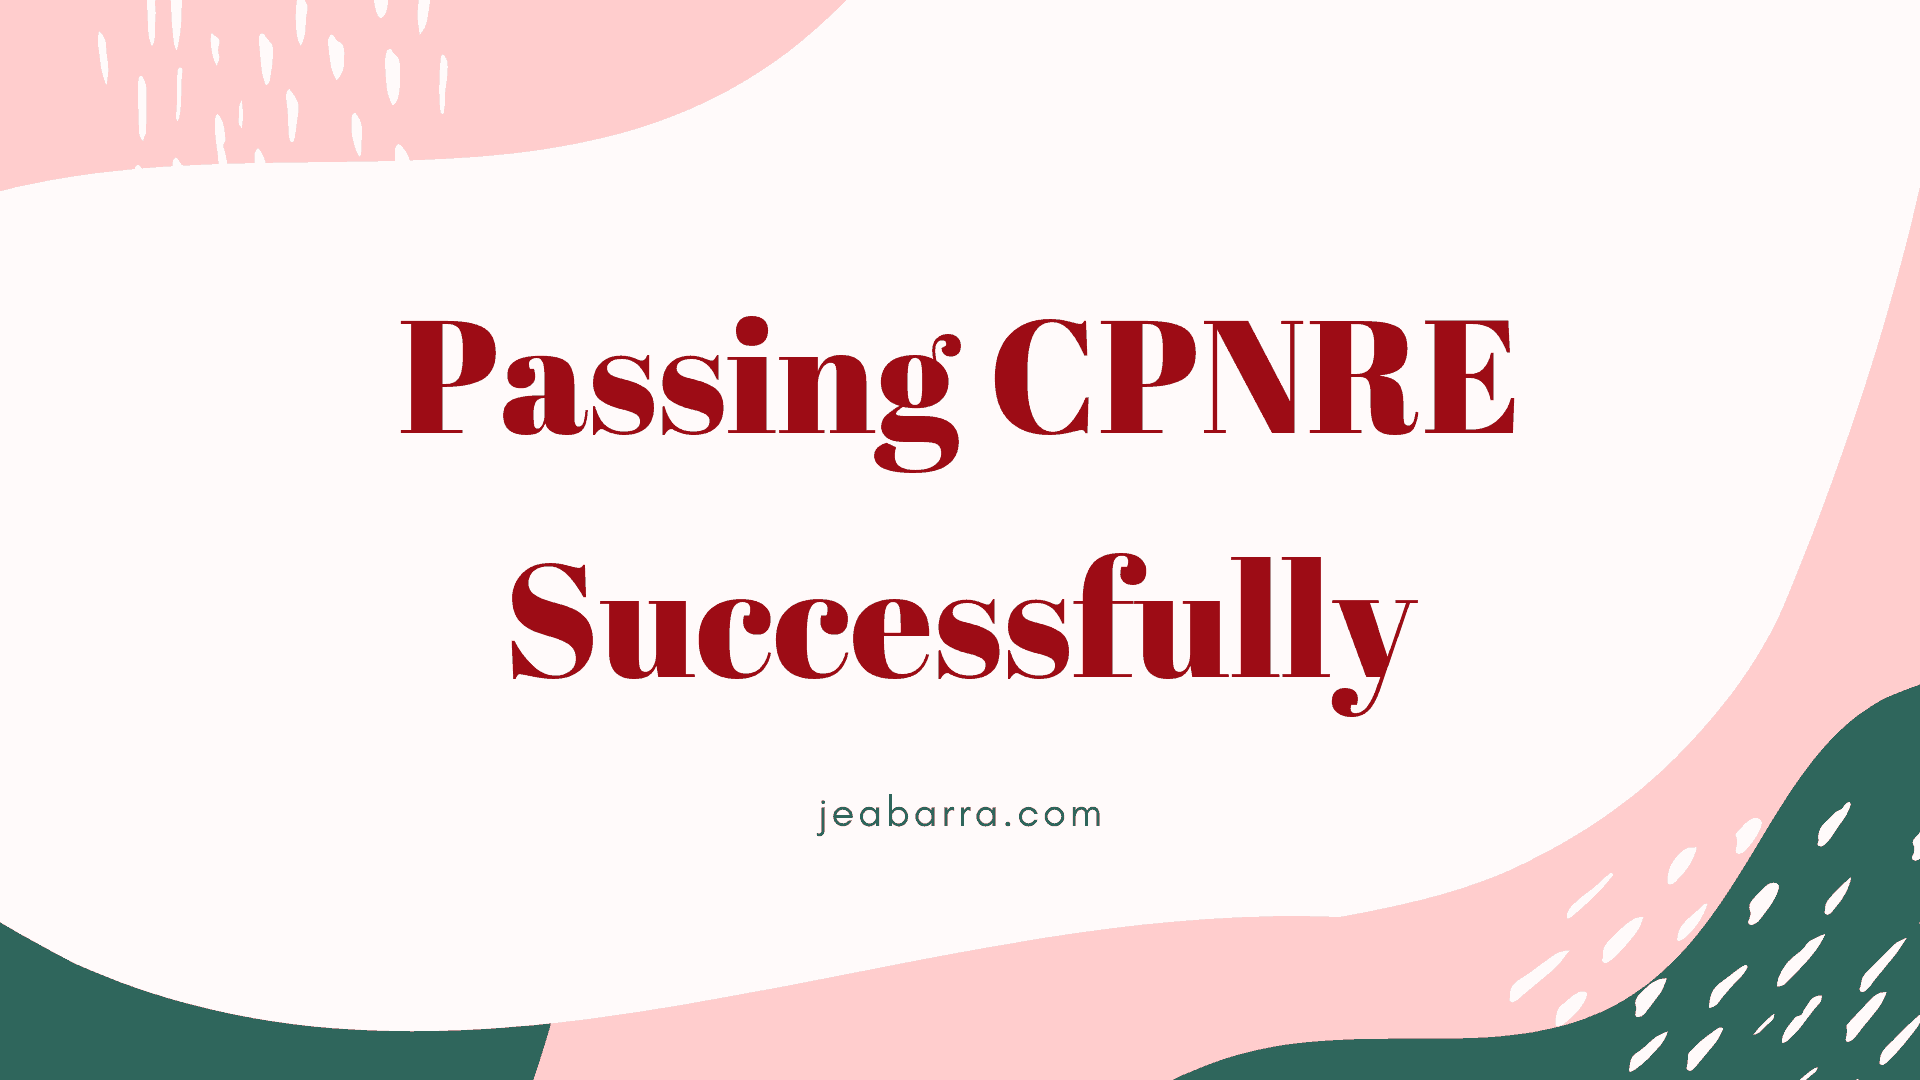 How to Pass CPNRE Successfully